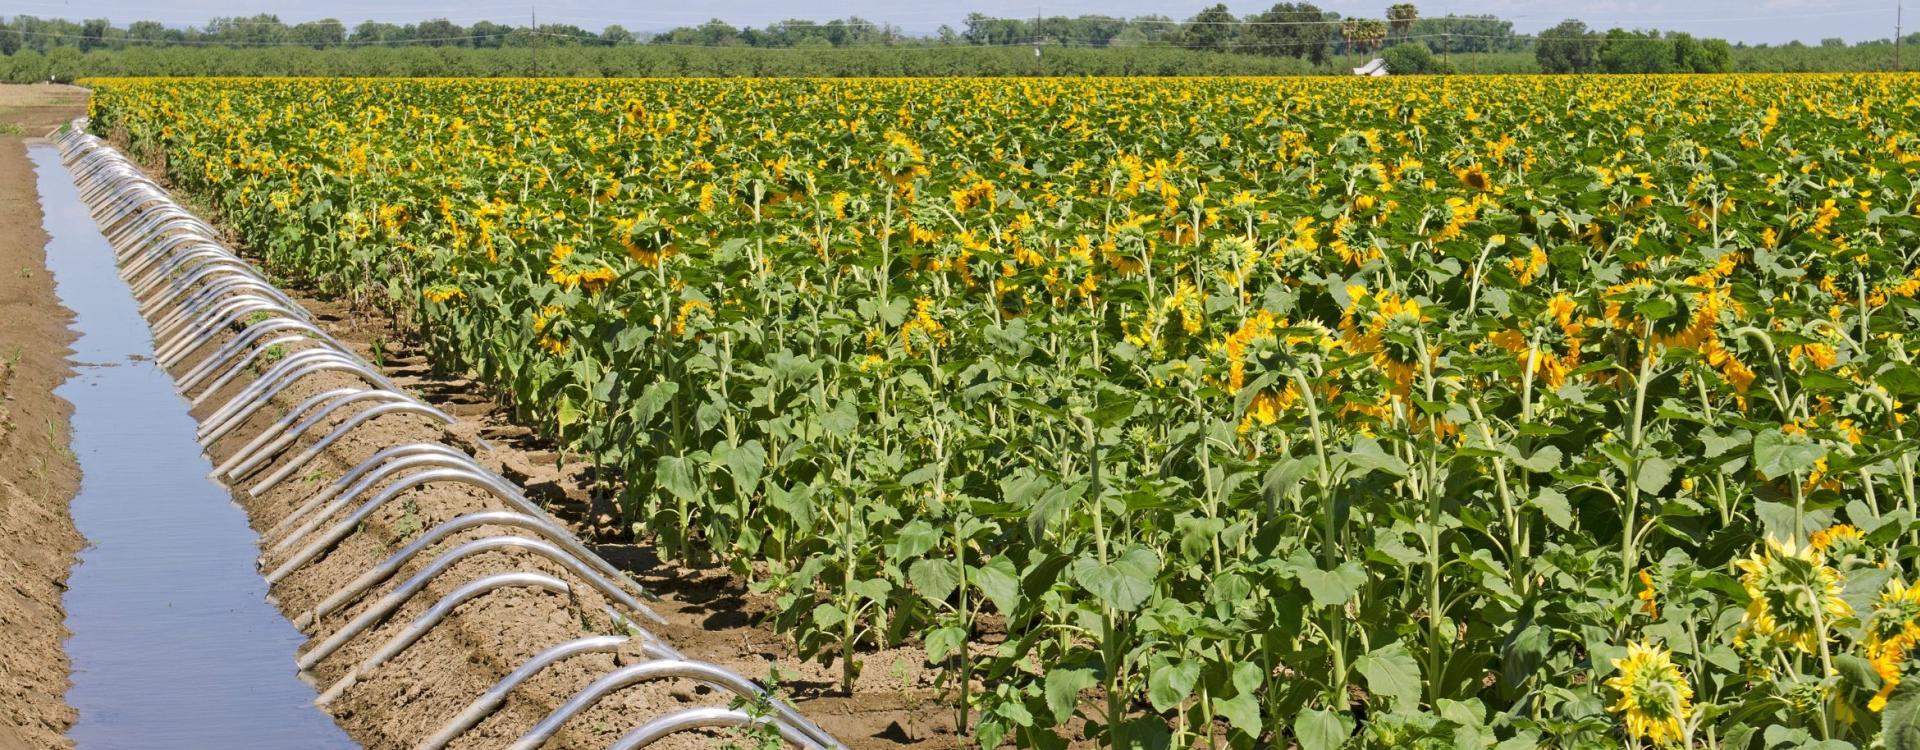 Sunflower field with irrigation channel on left side